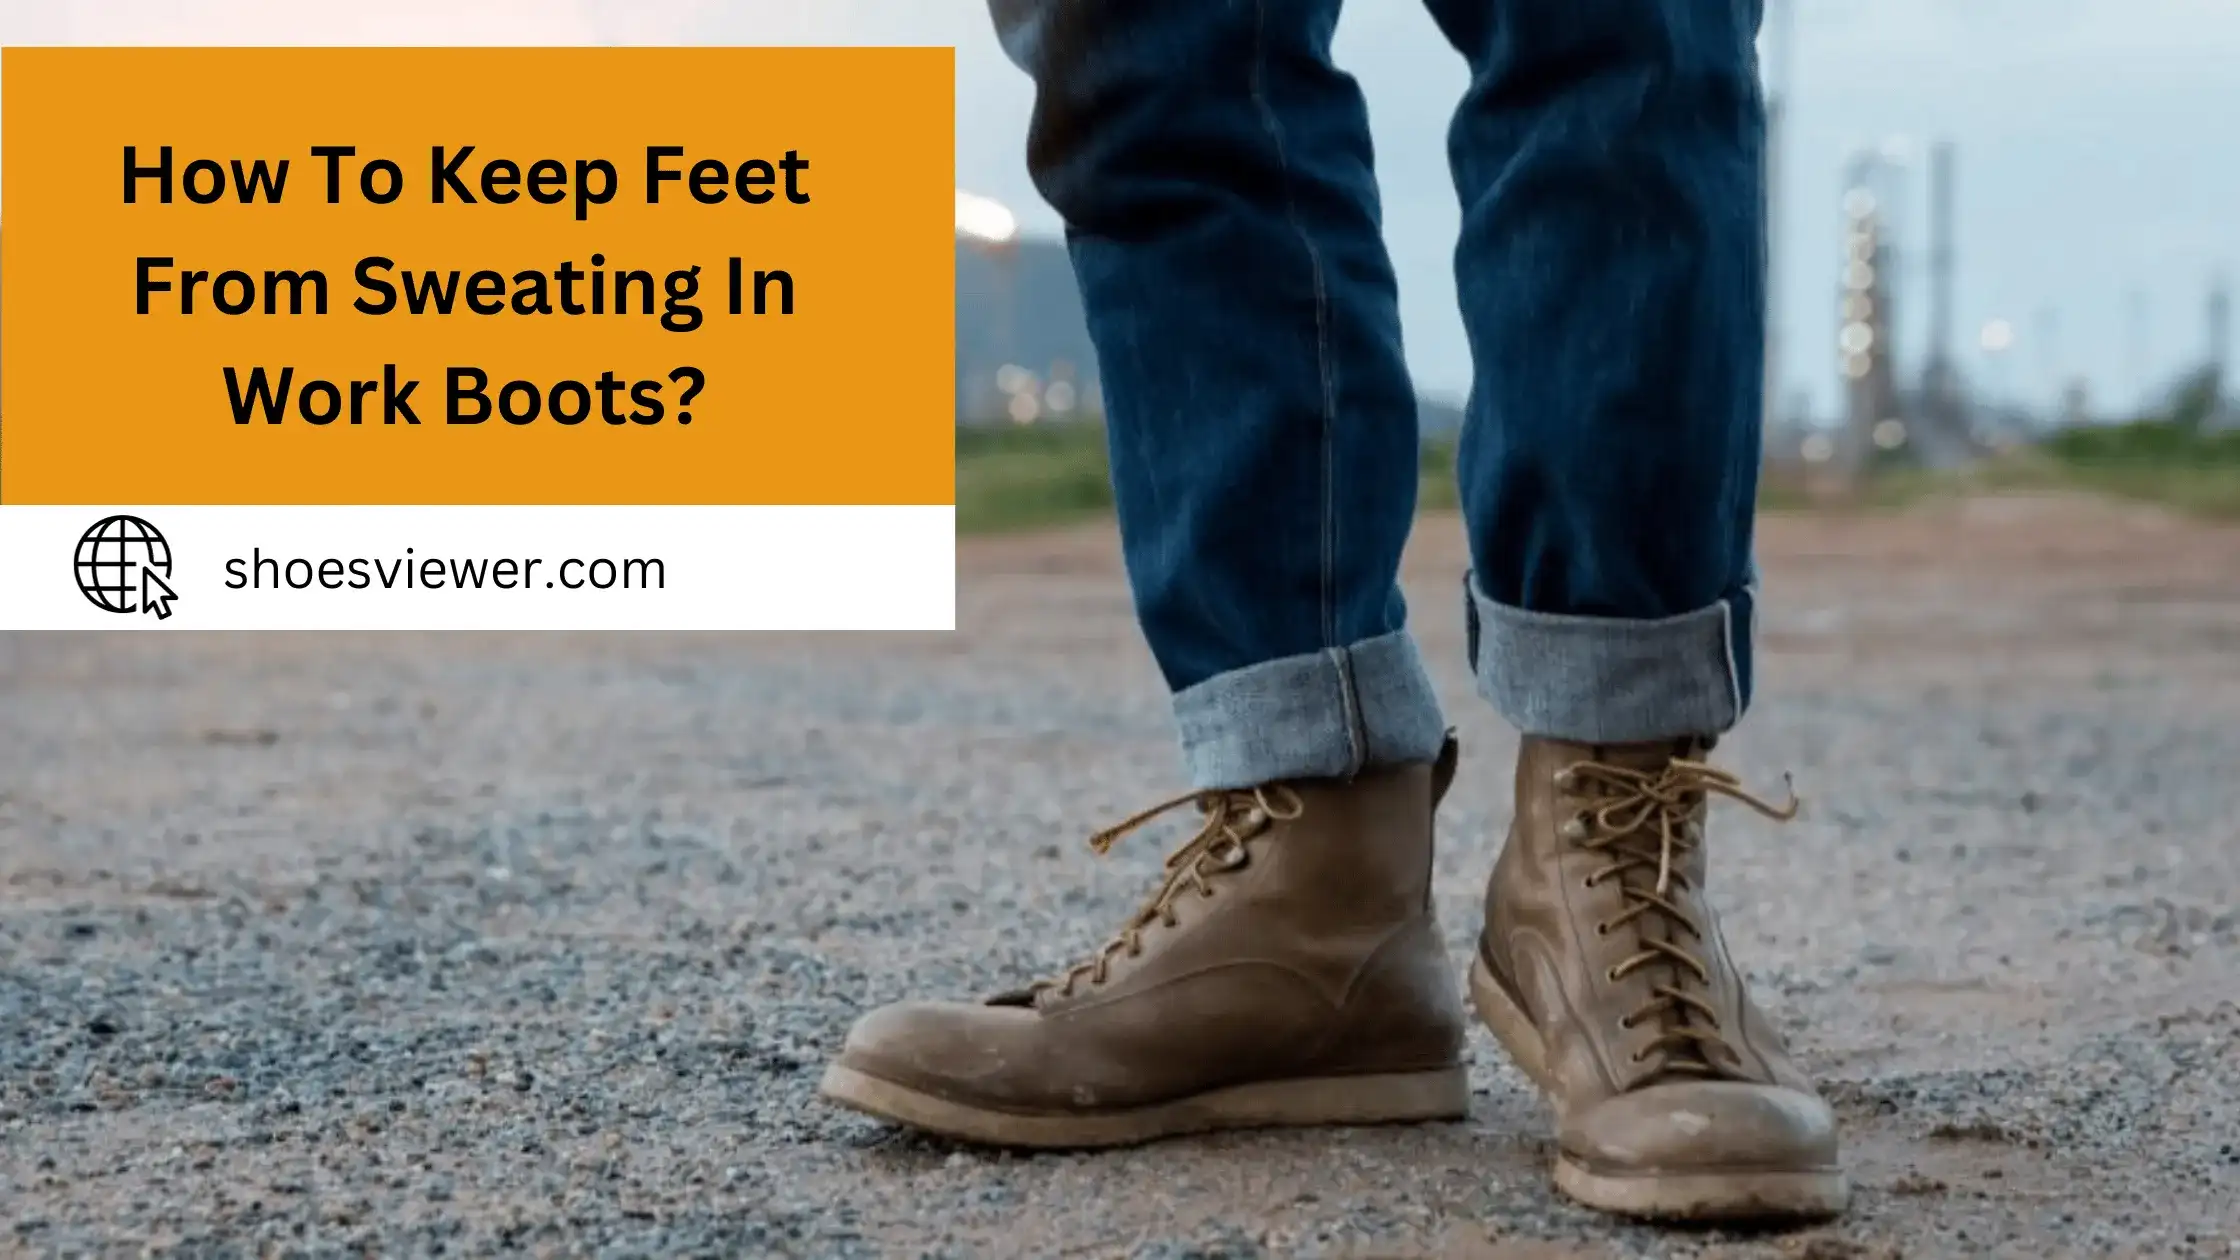 How To Keep Feet From Sweating In Work Boots? Ultimate Guide